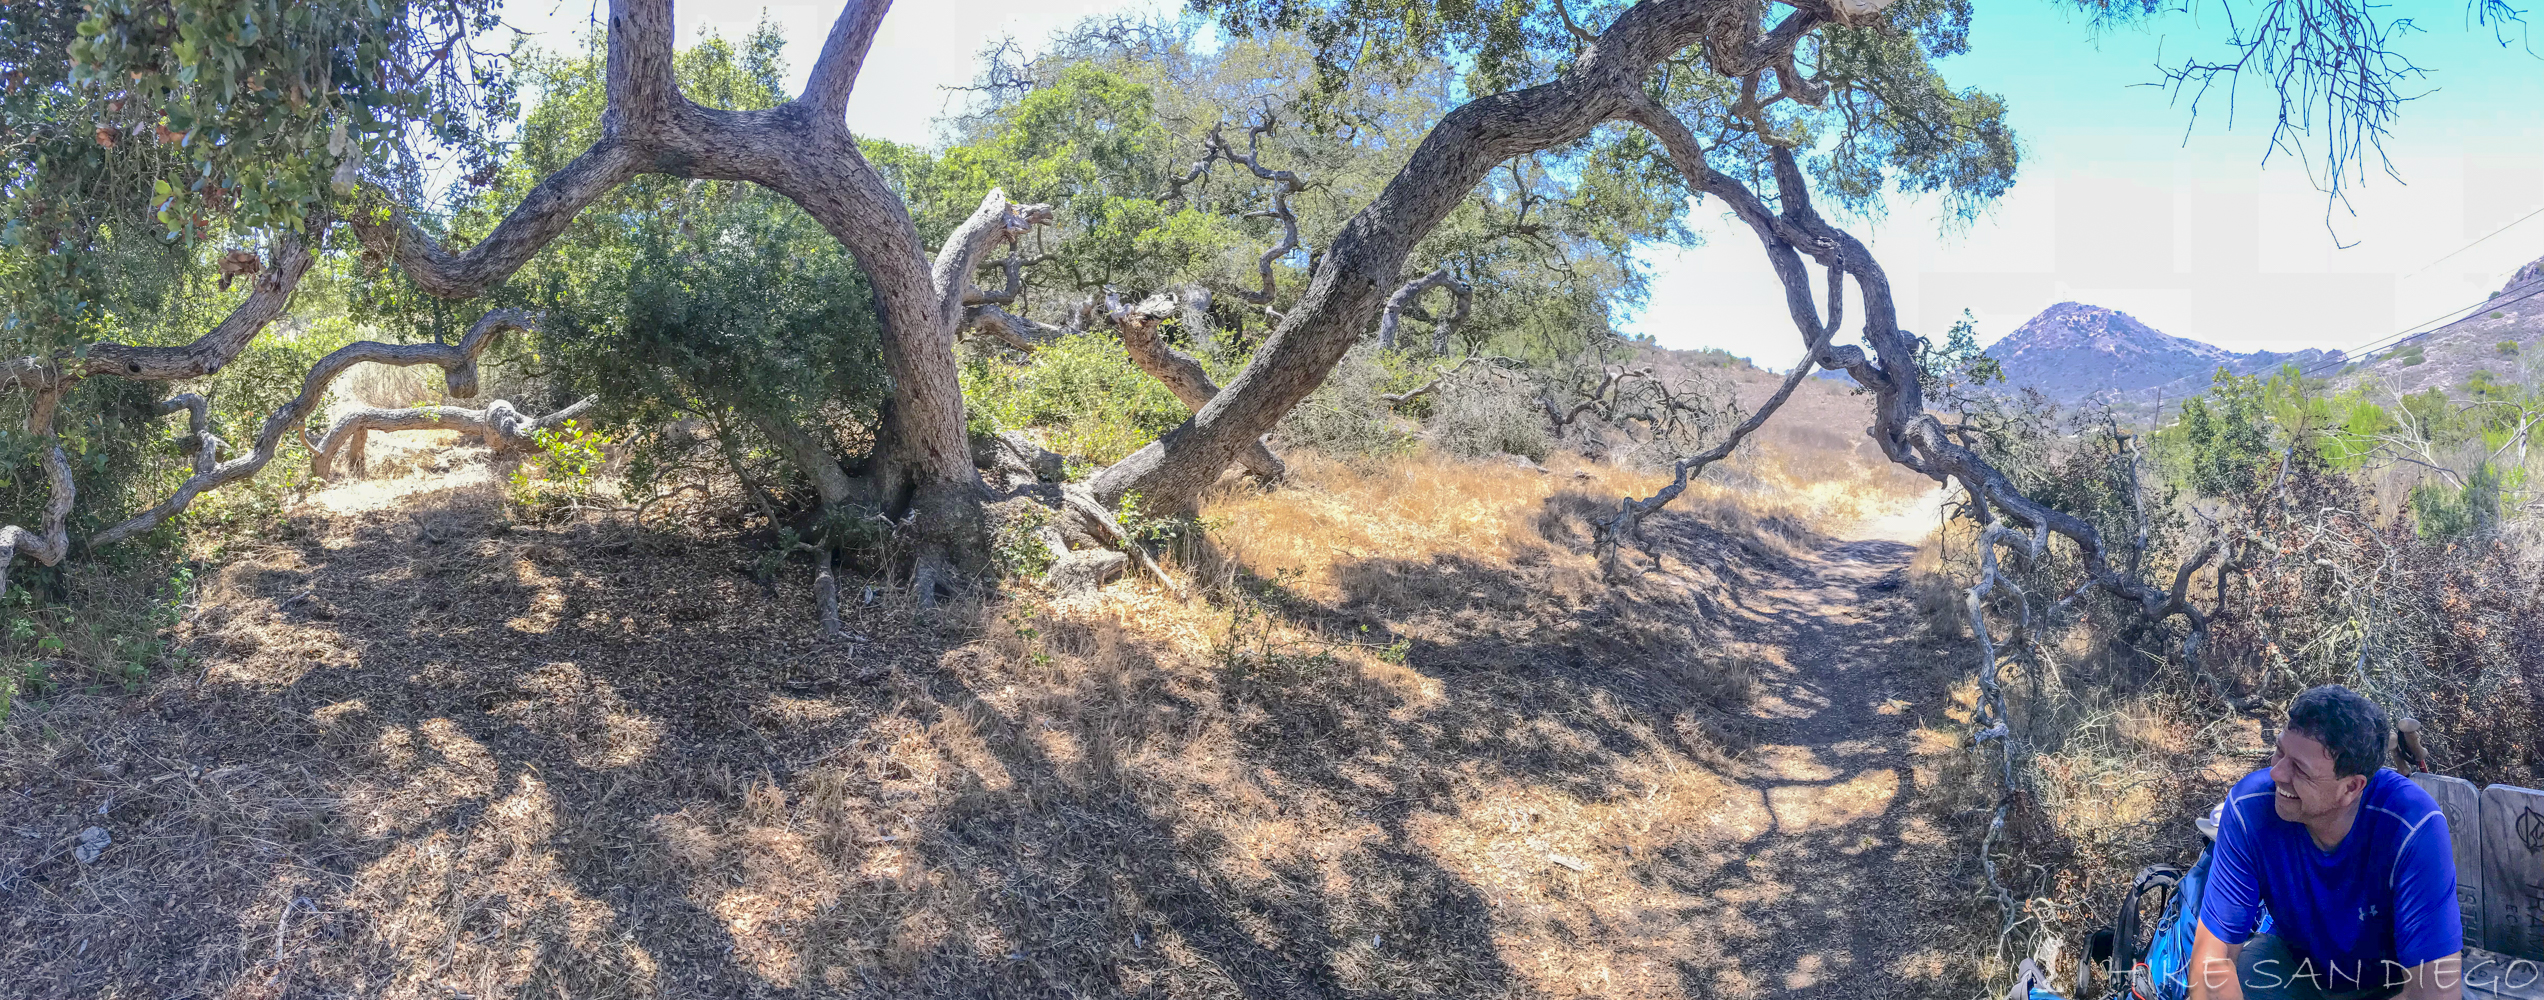 Crappy Iphone pano of the resting spot. Enjoy the shade while you can. 